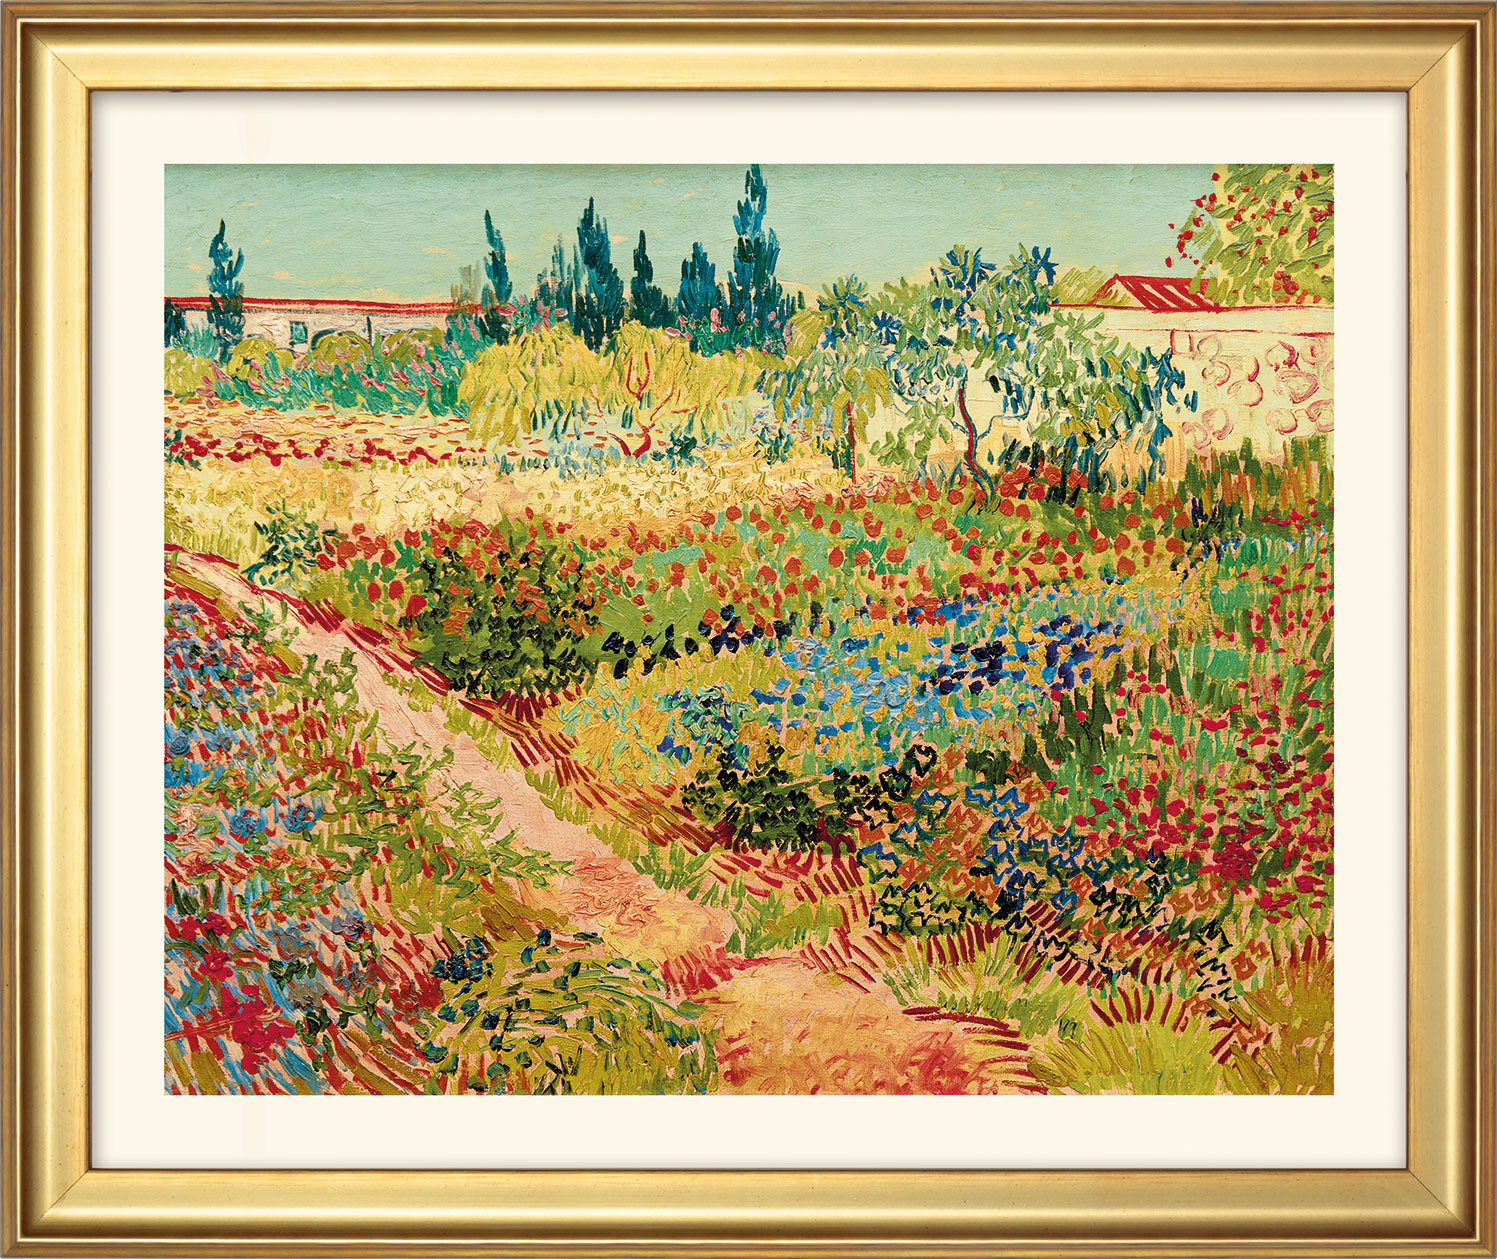 Picture "Blooming Garden with Path" (1888), framed by Vincent van Gogh